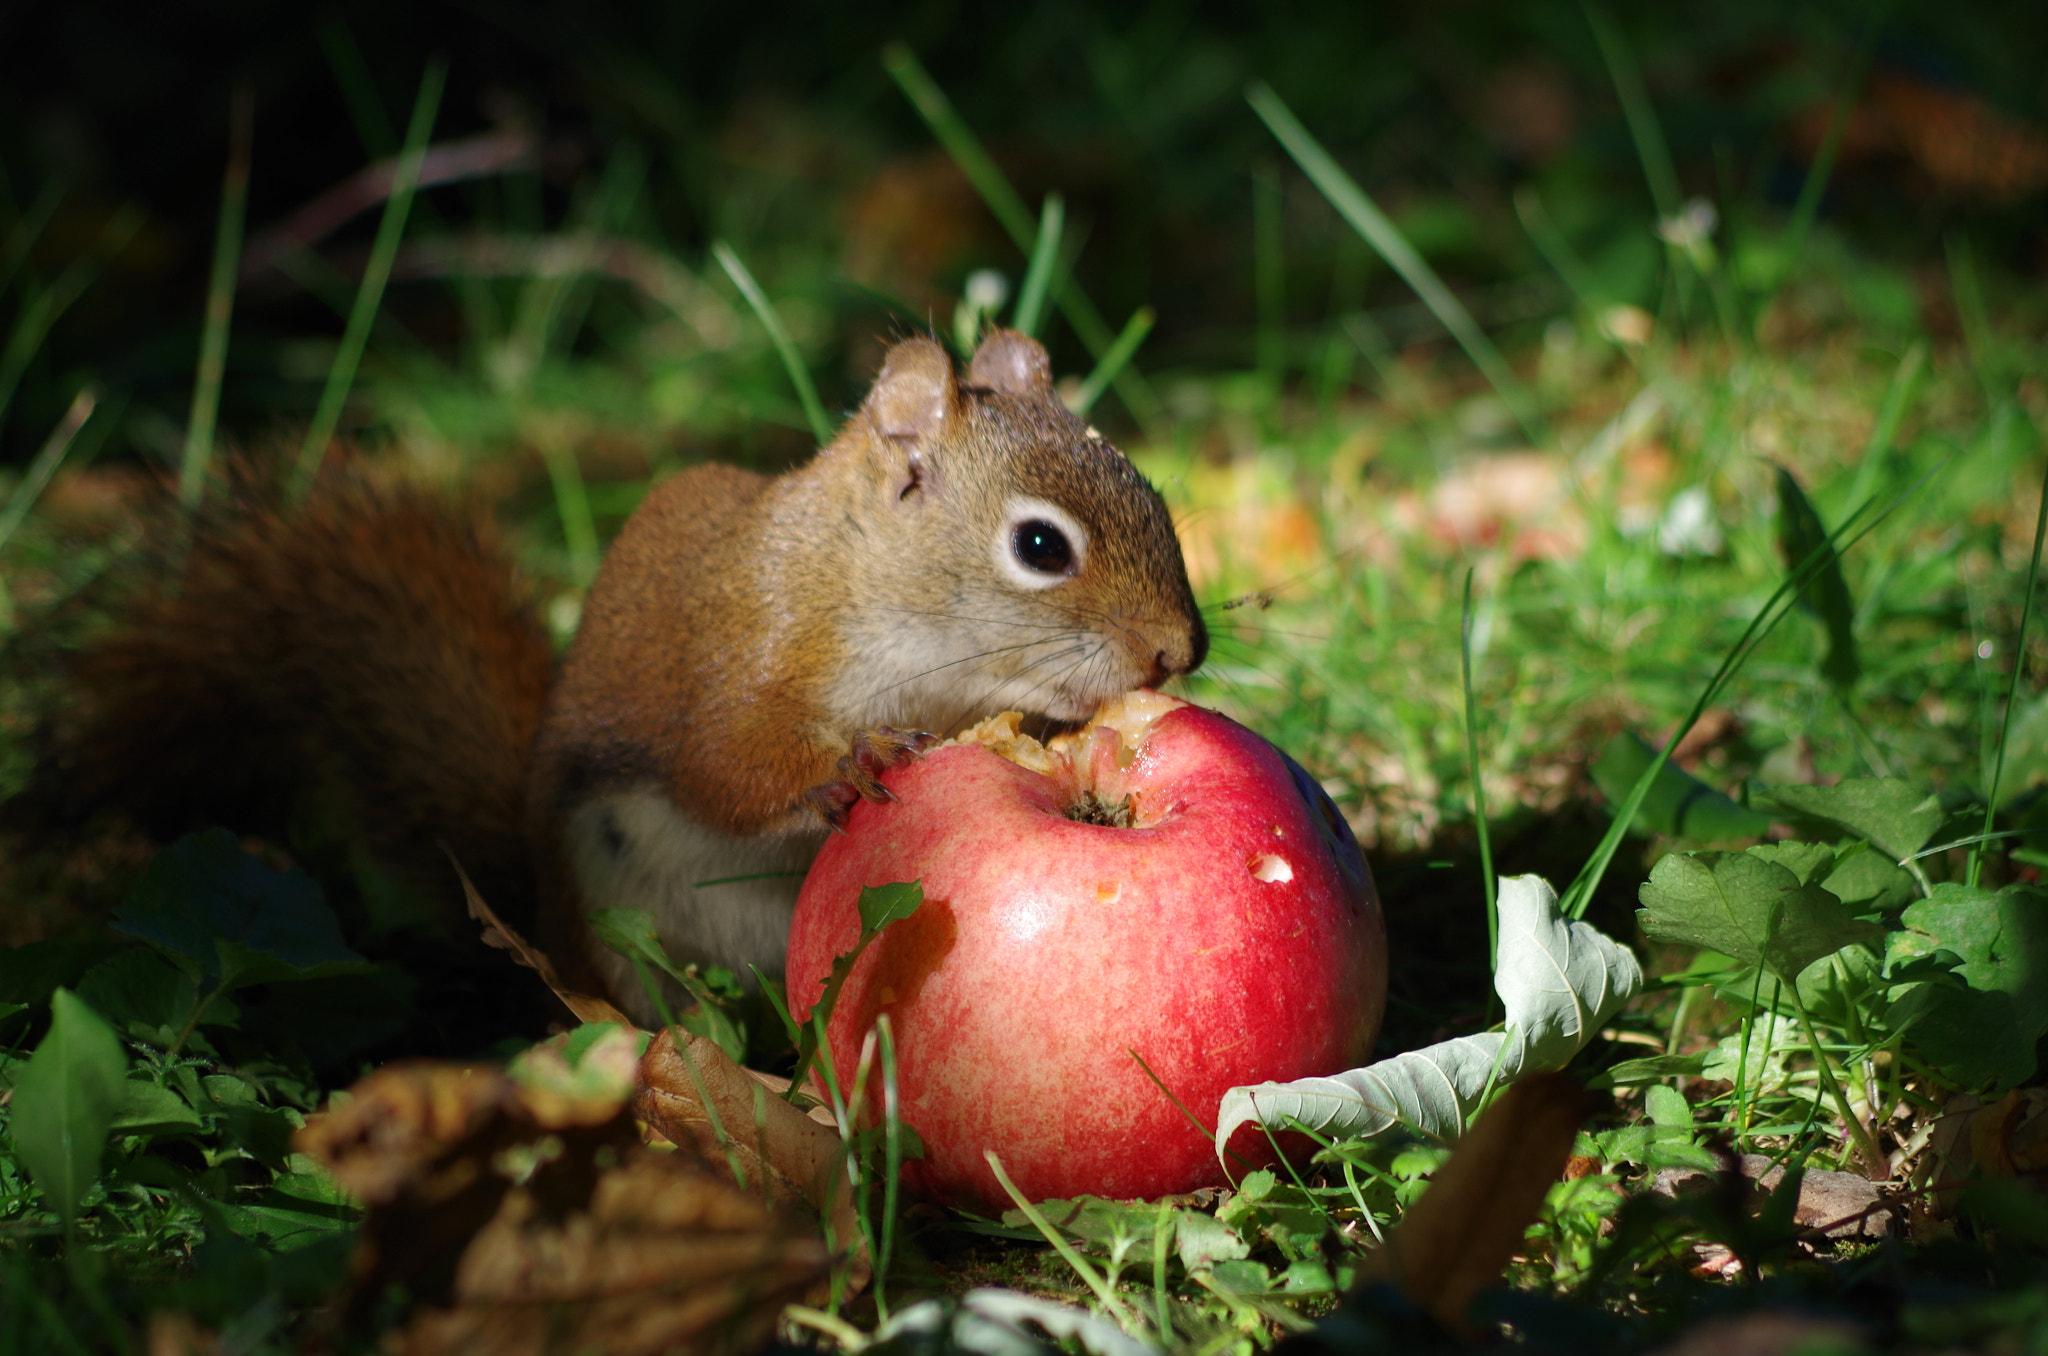 Pentax K-500 sample photo. The squirrel and the apple photography